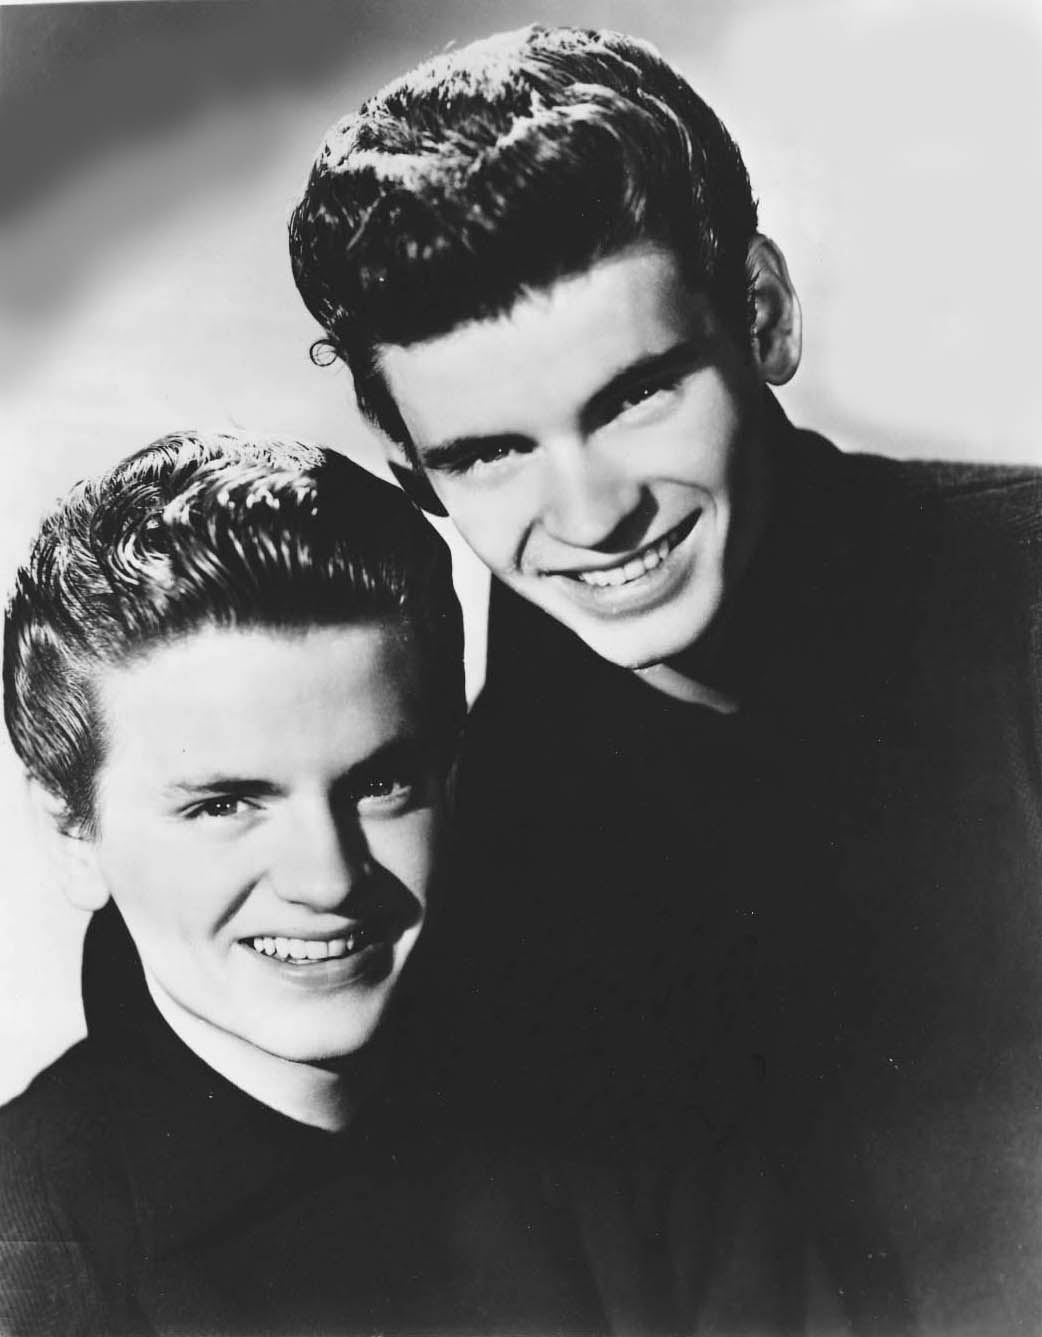 The Music and Harmonies of The Everly Brothers